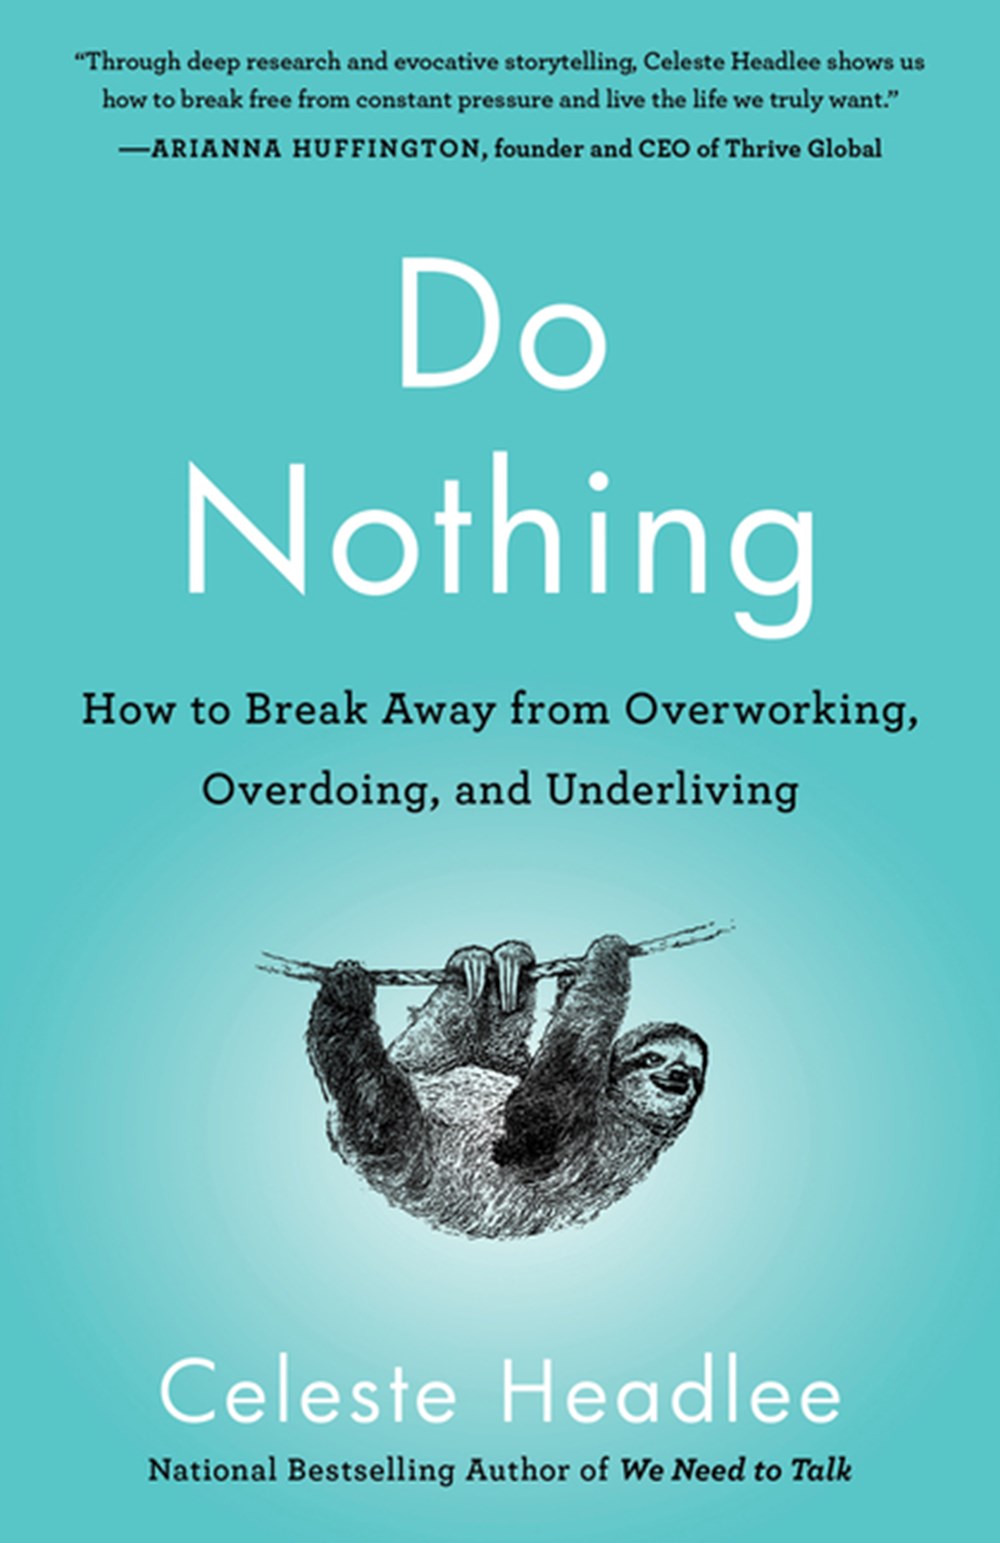 Do Nothing How to Break Away from Overworking, Overdoing, and Underliving